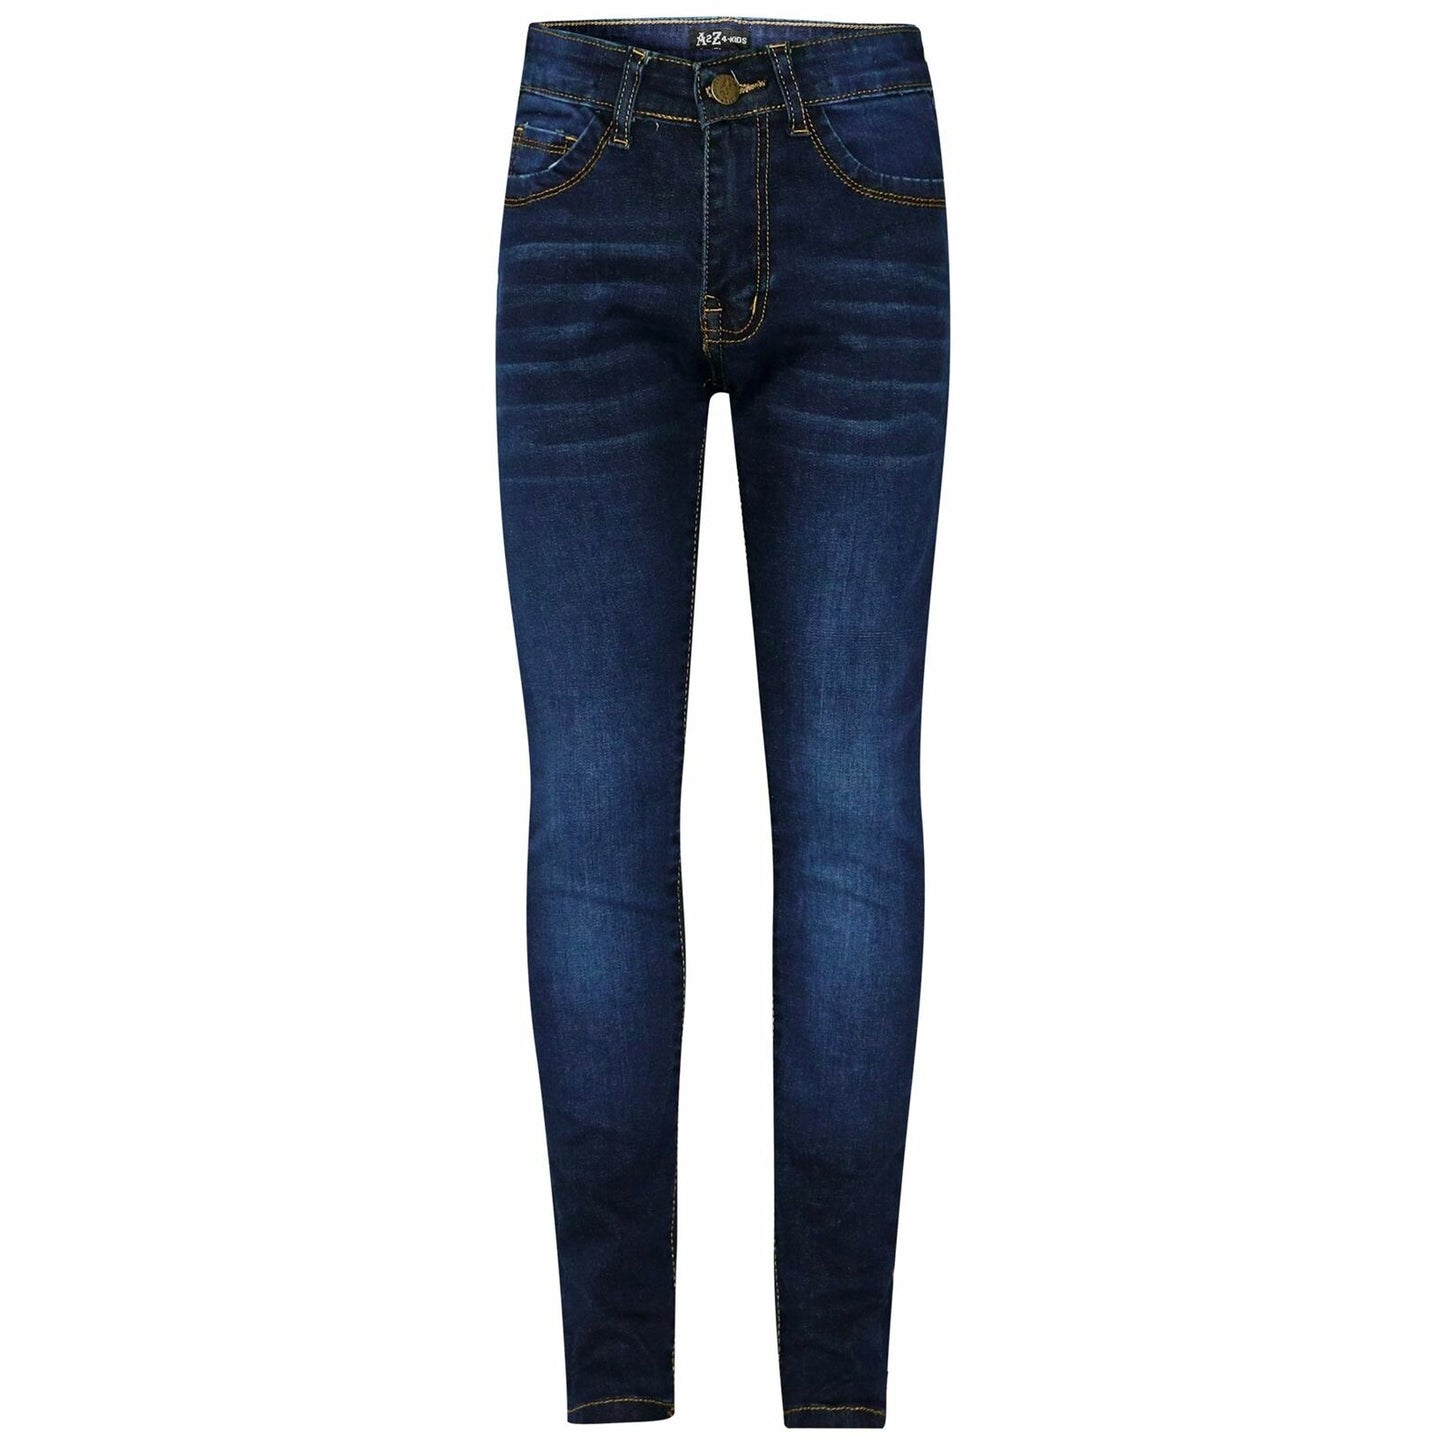 Girls Skinny Fit Dark Blue Denim Jeans. Available Ages 5-14 Available.